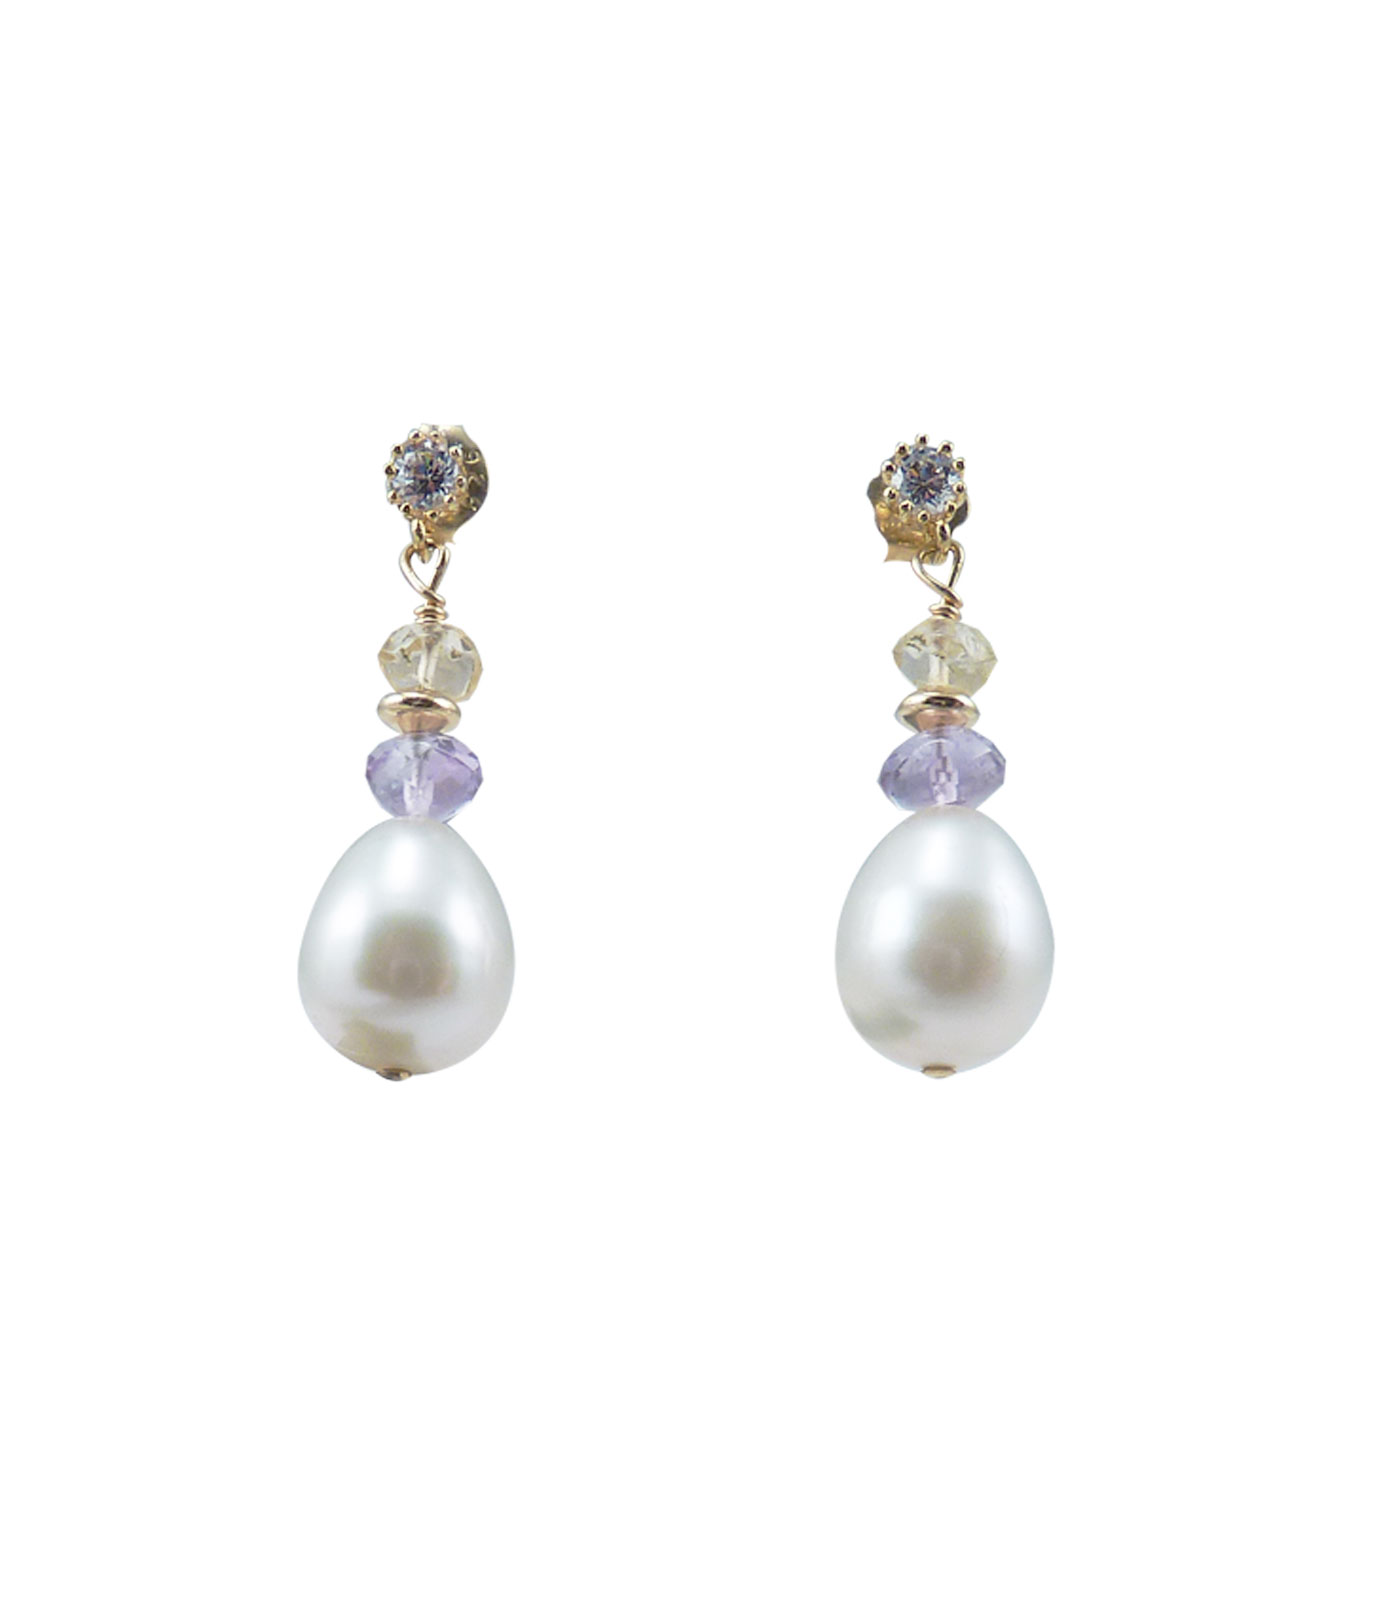 Designer pearl earrings citrine and amethyst are colored accents